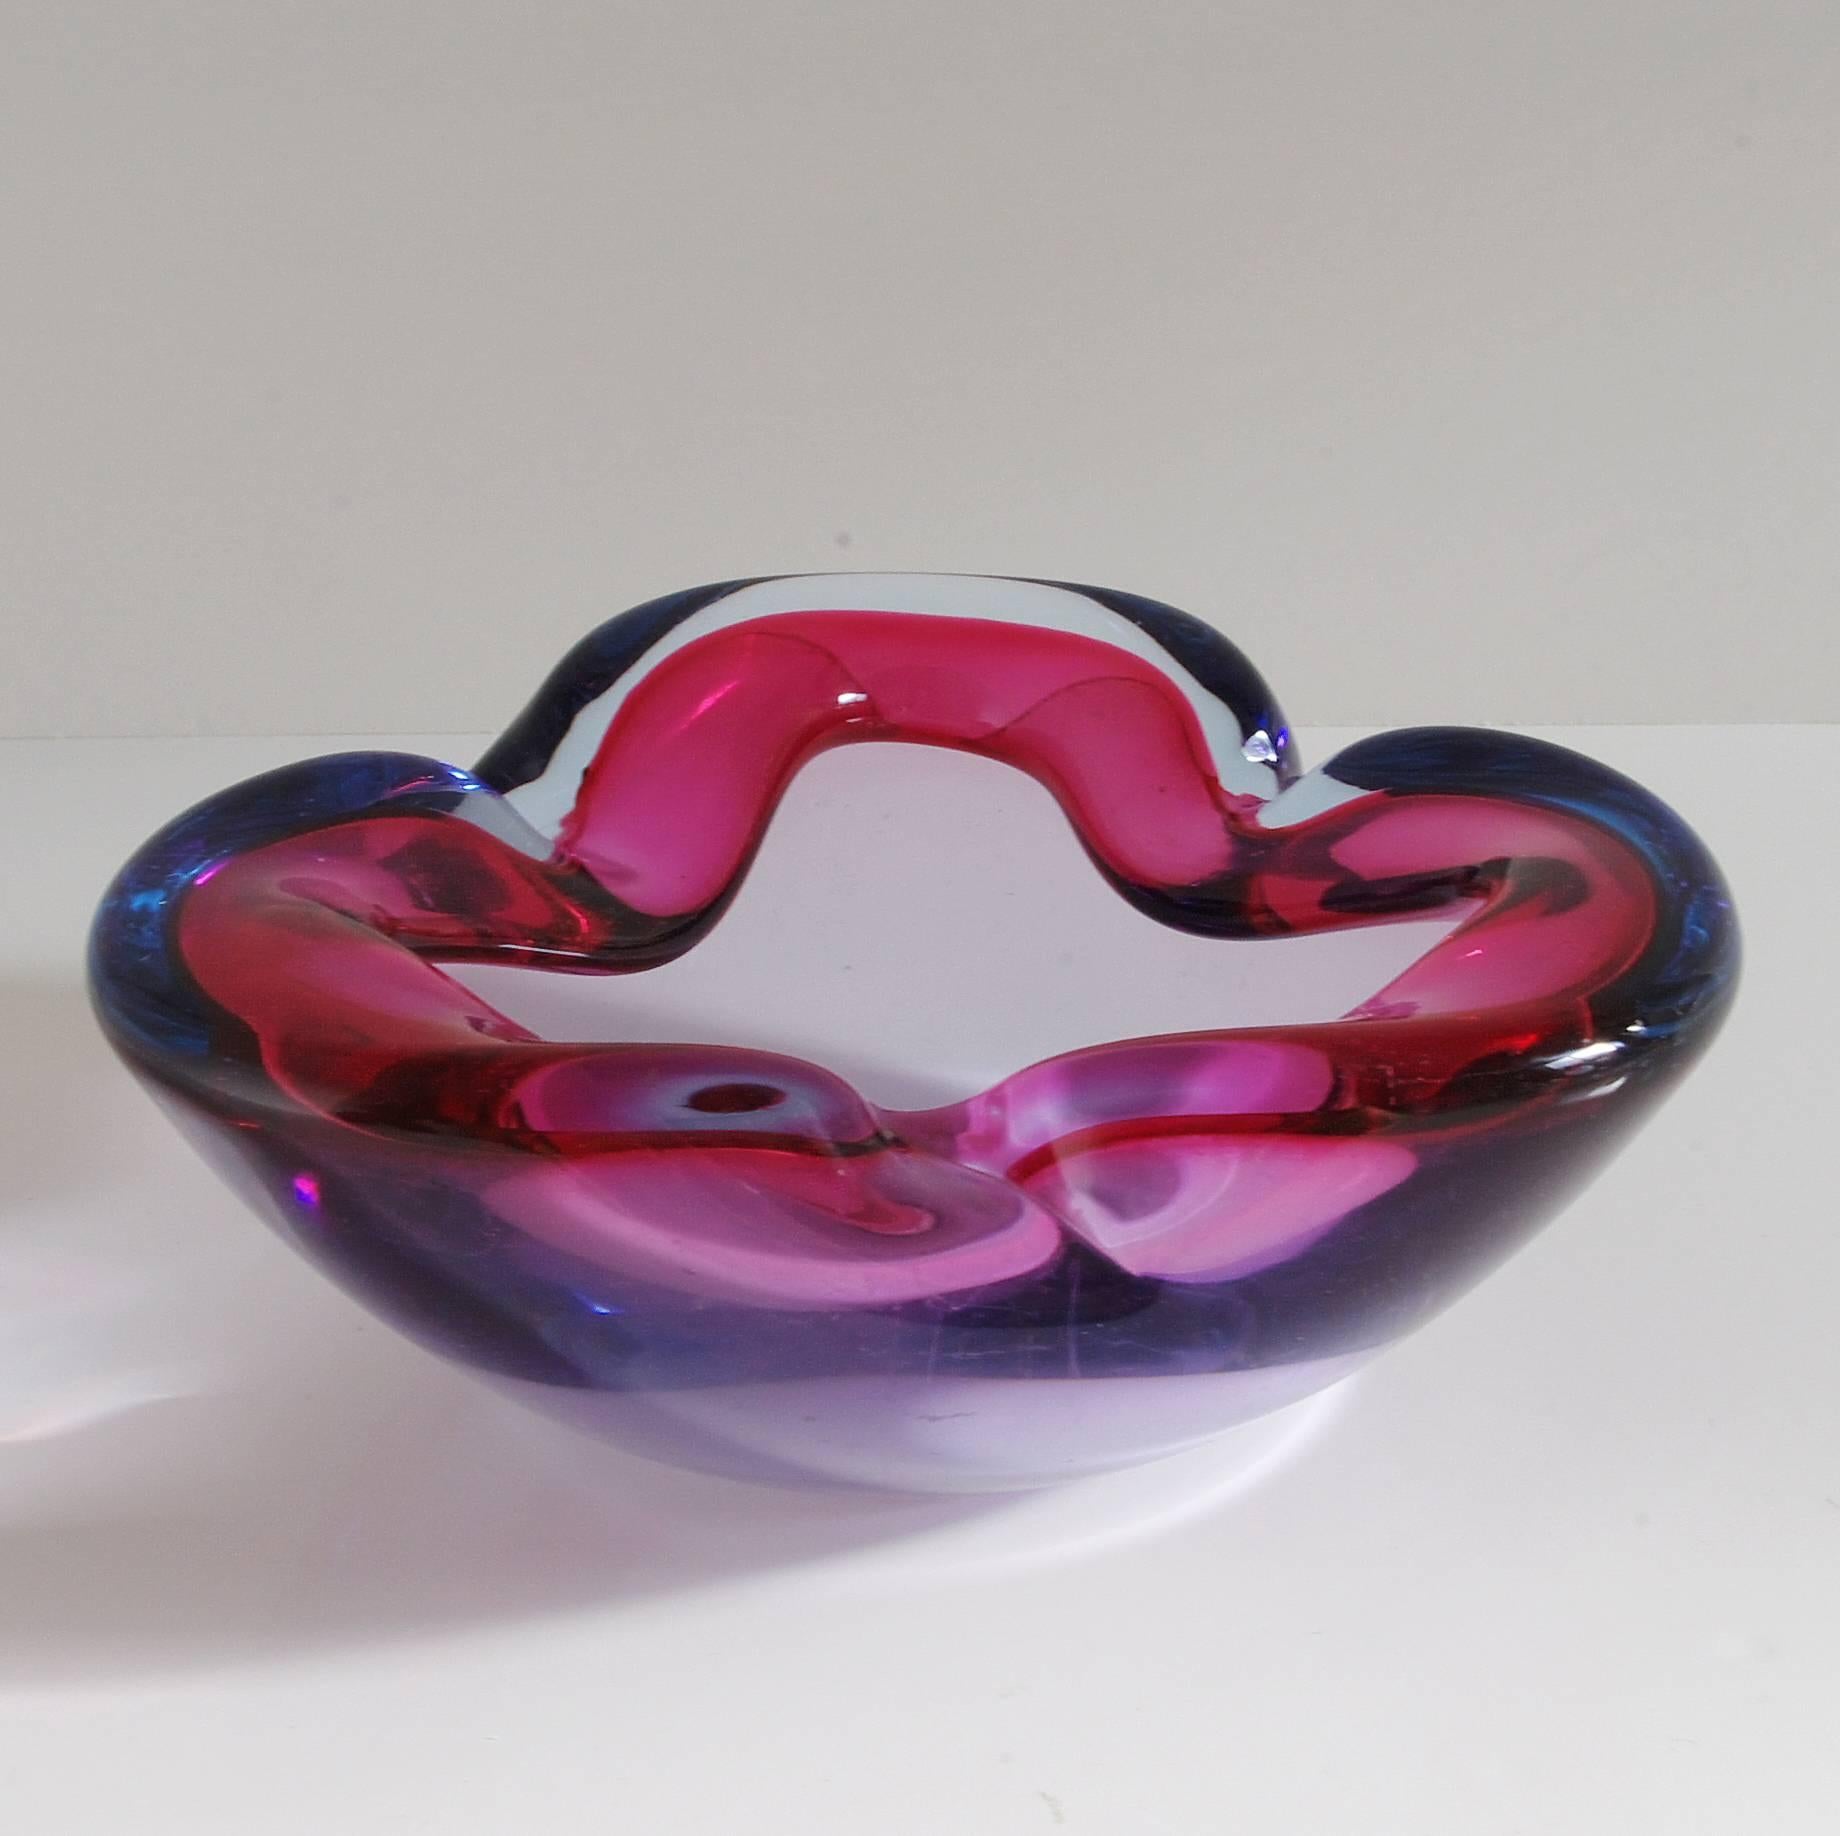 Pink and blue Italian Murano glass ashtray or bowl.
